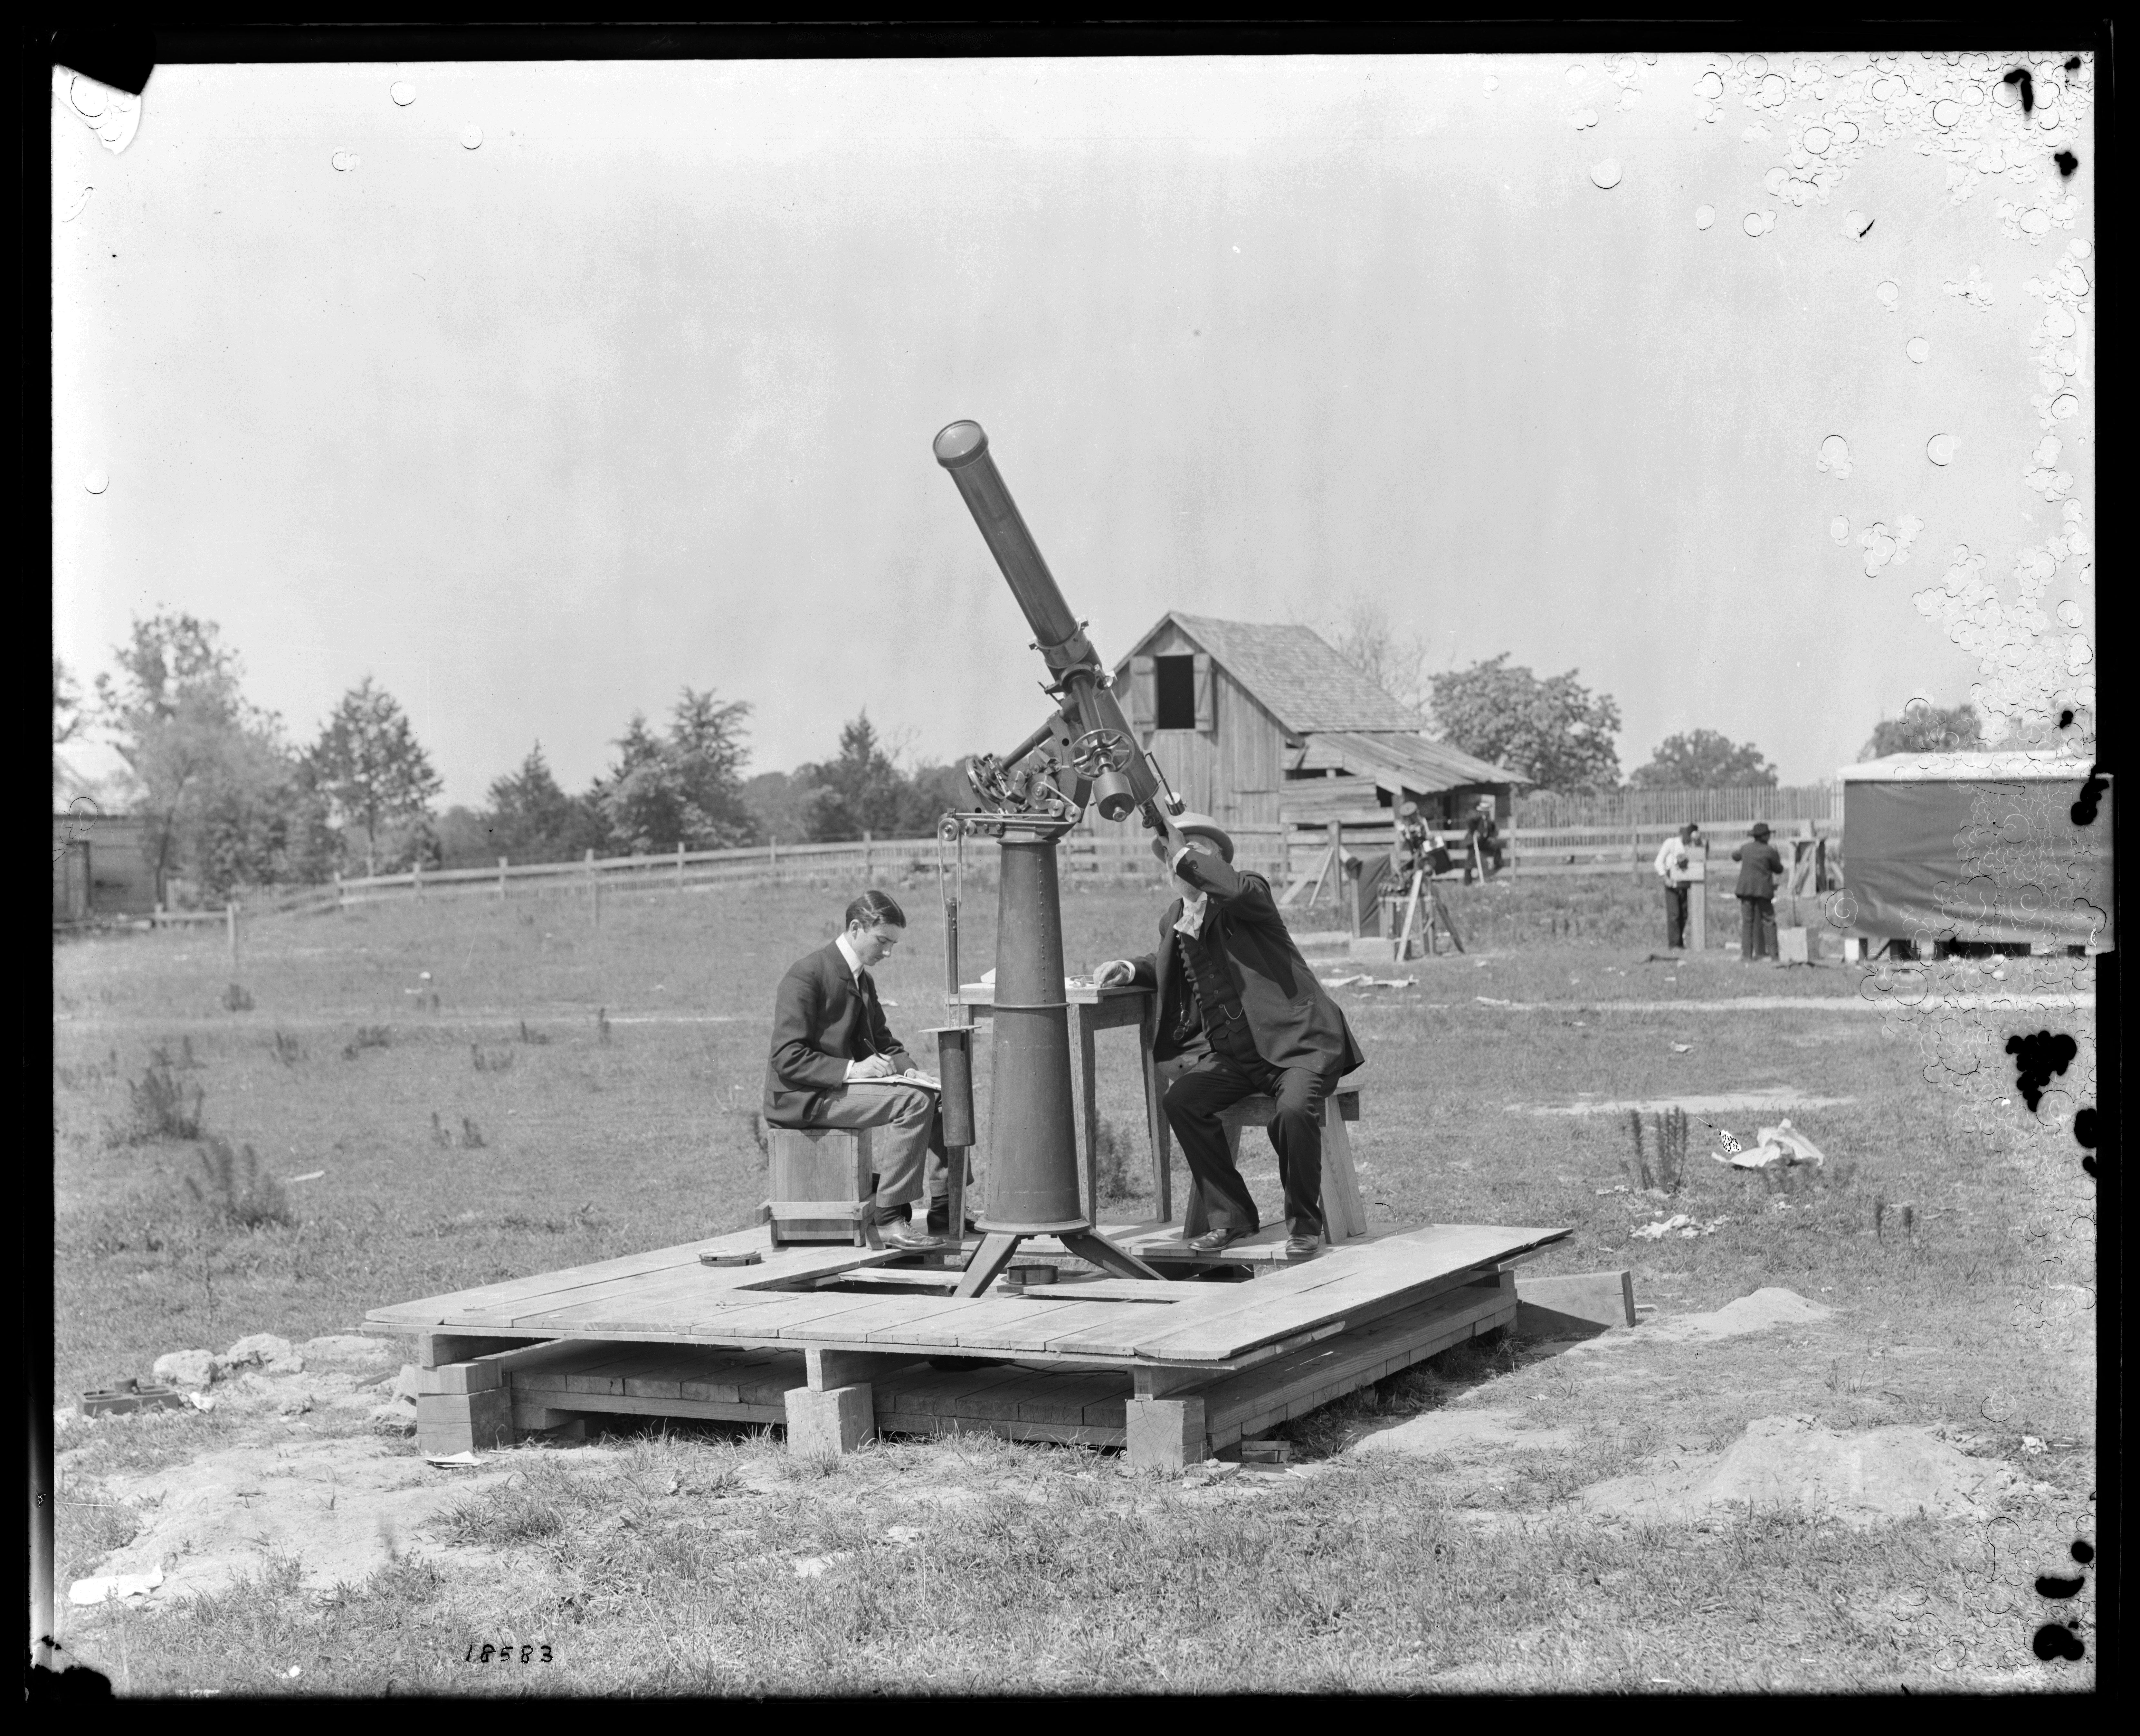 2 men  in a field on wooden platform with telescope with one man peering up into the telescope.